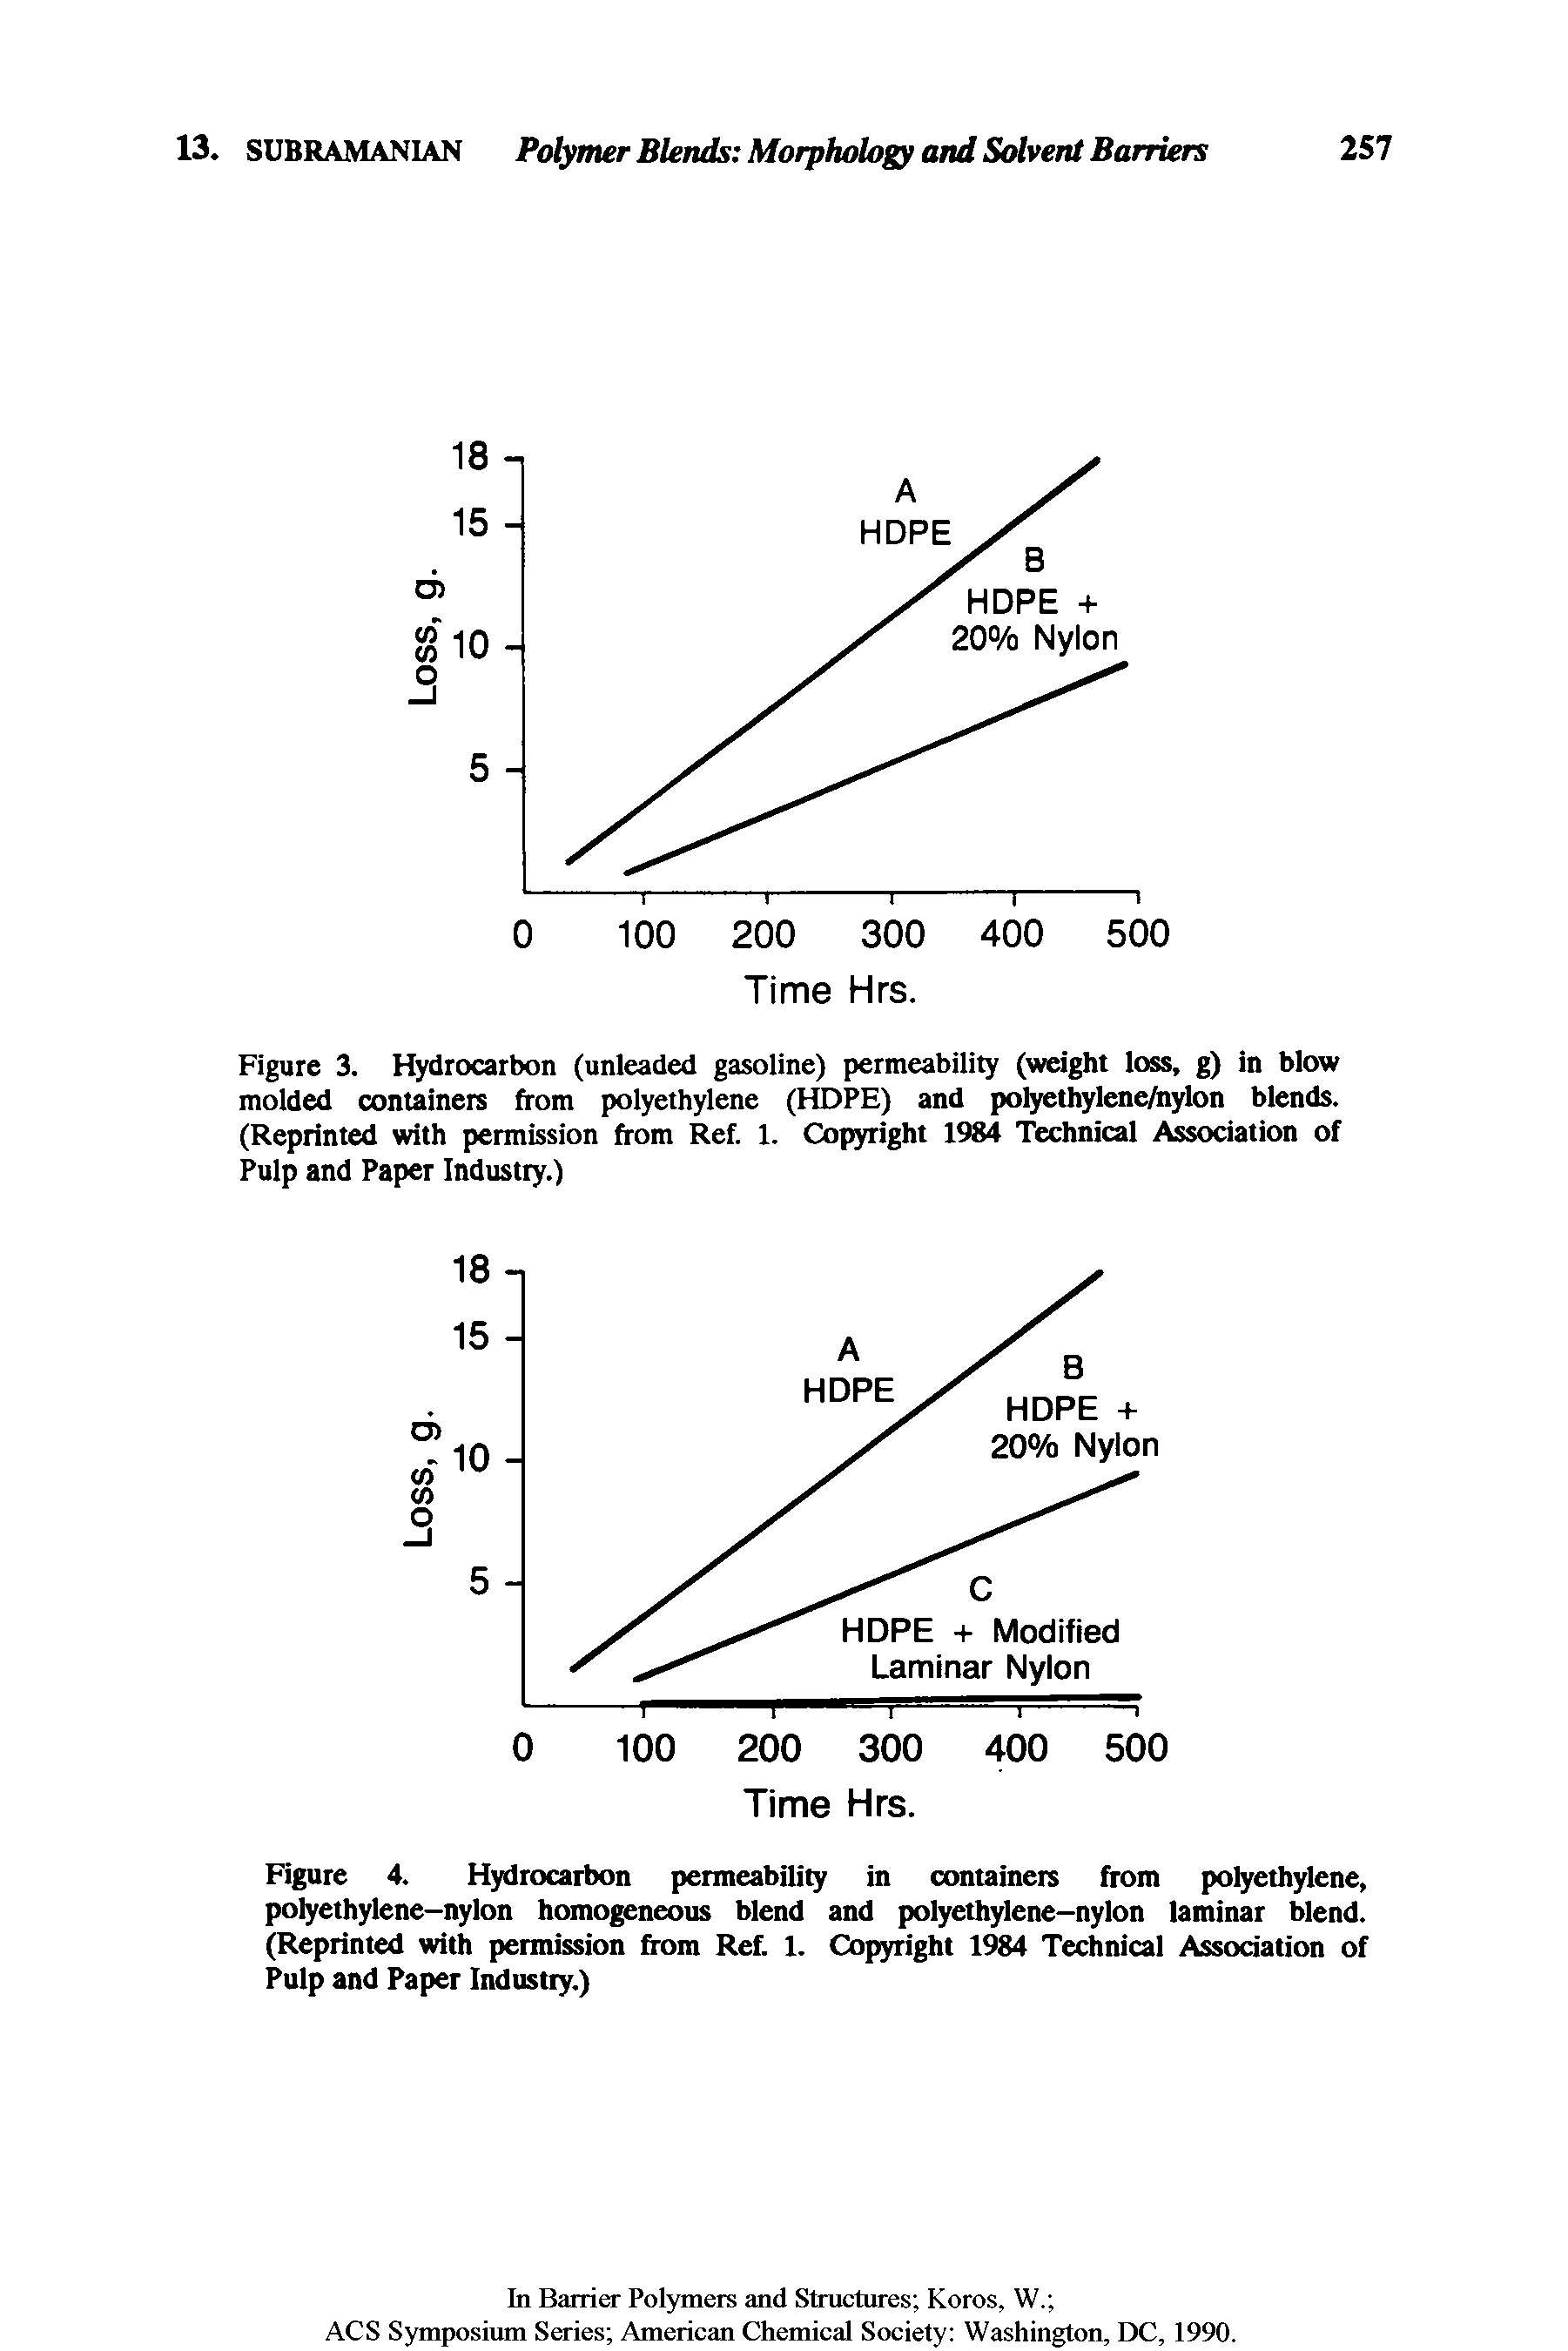 Figure 3. Hydrocarbon (unleaded gasoline) permeability (weight loss, g) in blow molded containers from polyethylene (HDPE) and polyethylene/nylon blends. (Reprinted with permission from Ref. 1. Copyright 1984 Technical Association of Pulp and Paper Industry.)...